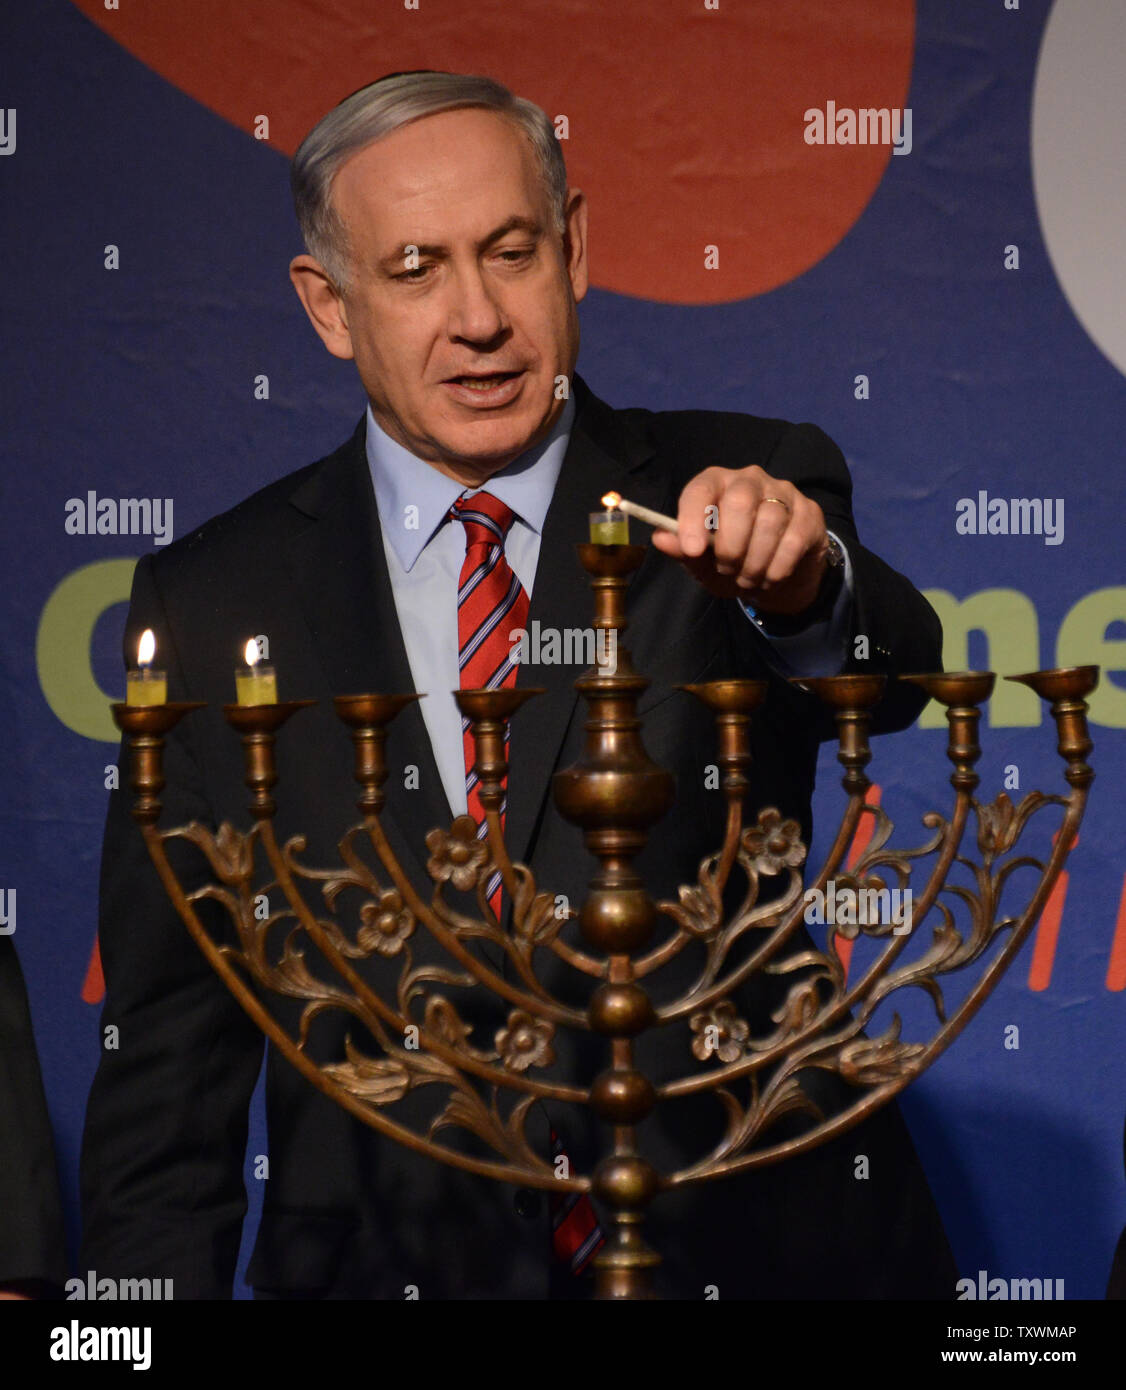 Israeli Prime Minister Benjamin Netanyahu lights candles on a menorah, on the second night of Hanukkah, at an event with the foreign press at the Israeli Museum in Jerusalem, Israel, December 17, 2014. UPI/Debbie Hill Stock Photo